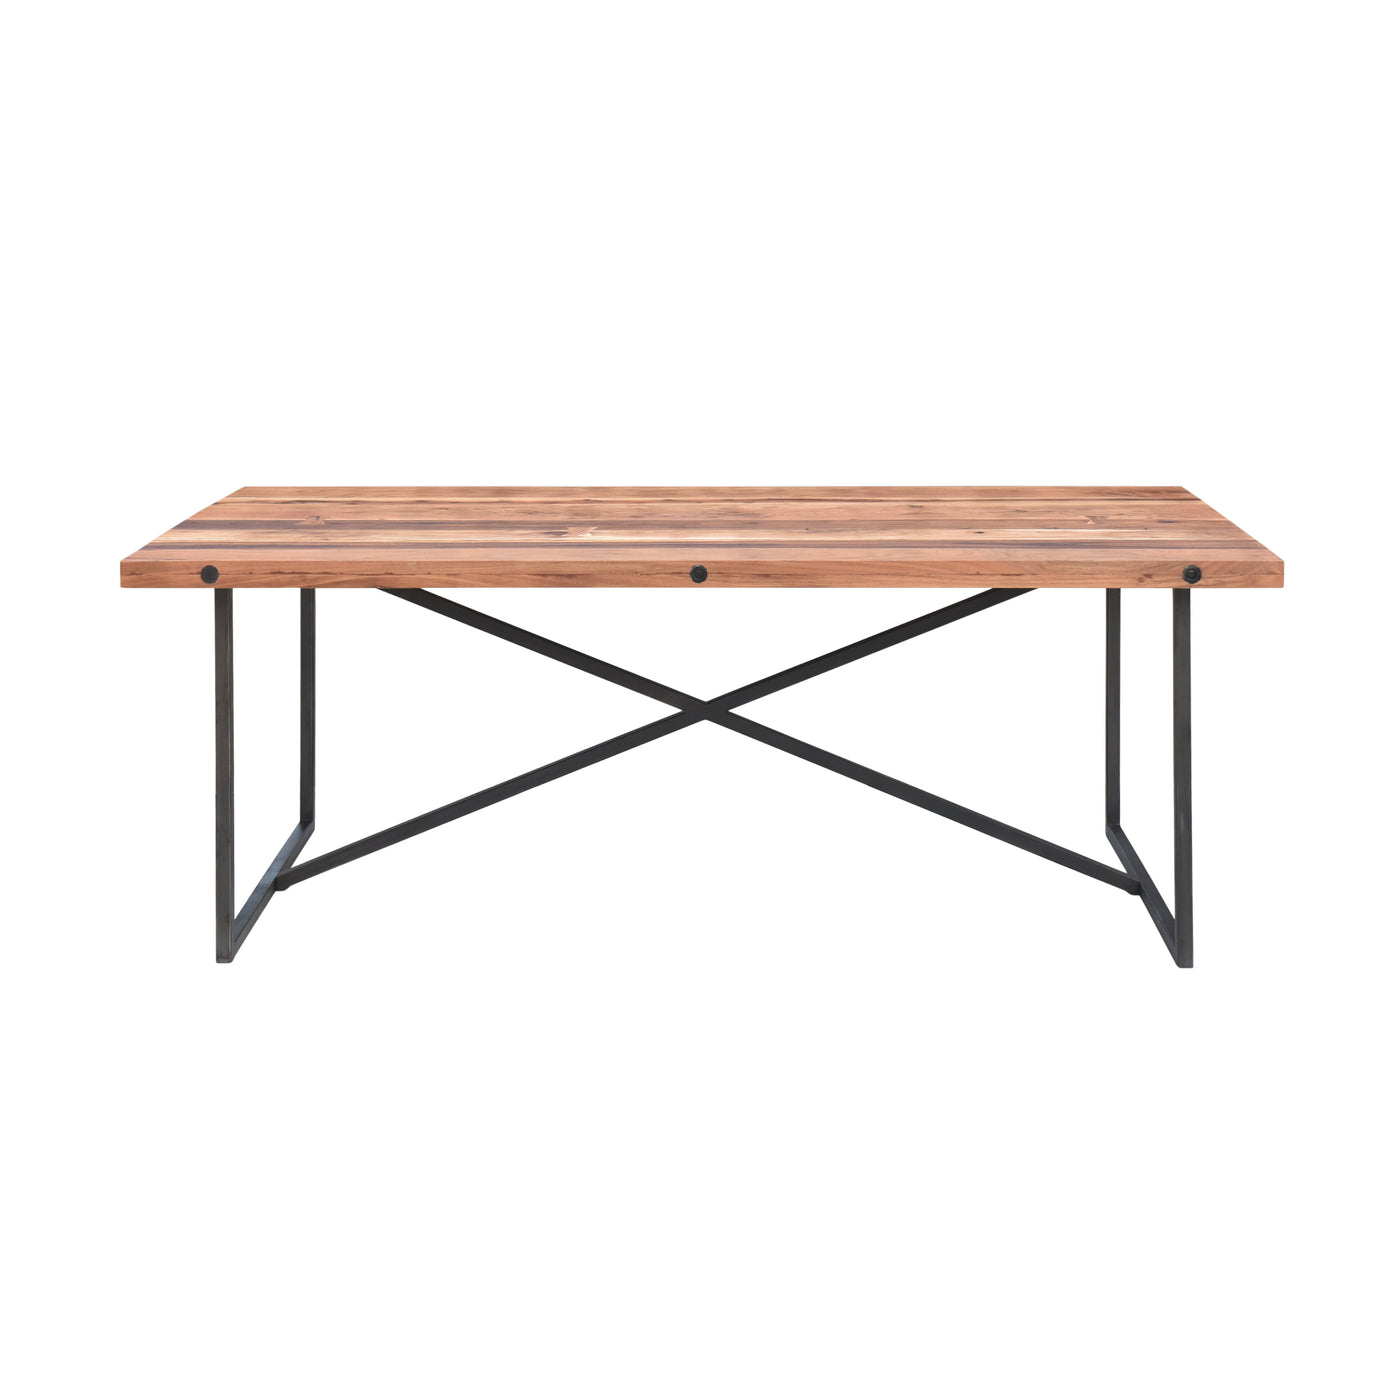 Railwood 8-Seat Dining Table in Mid-tone Brown Finish